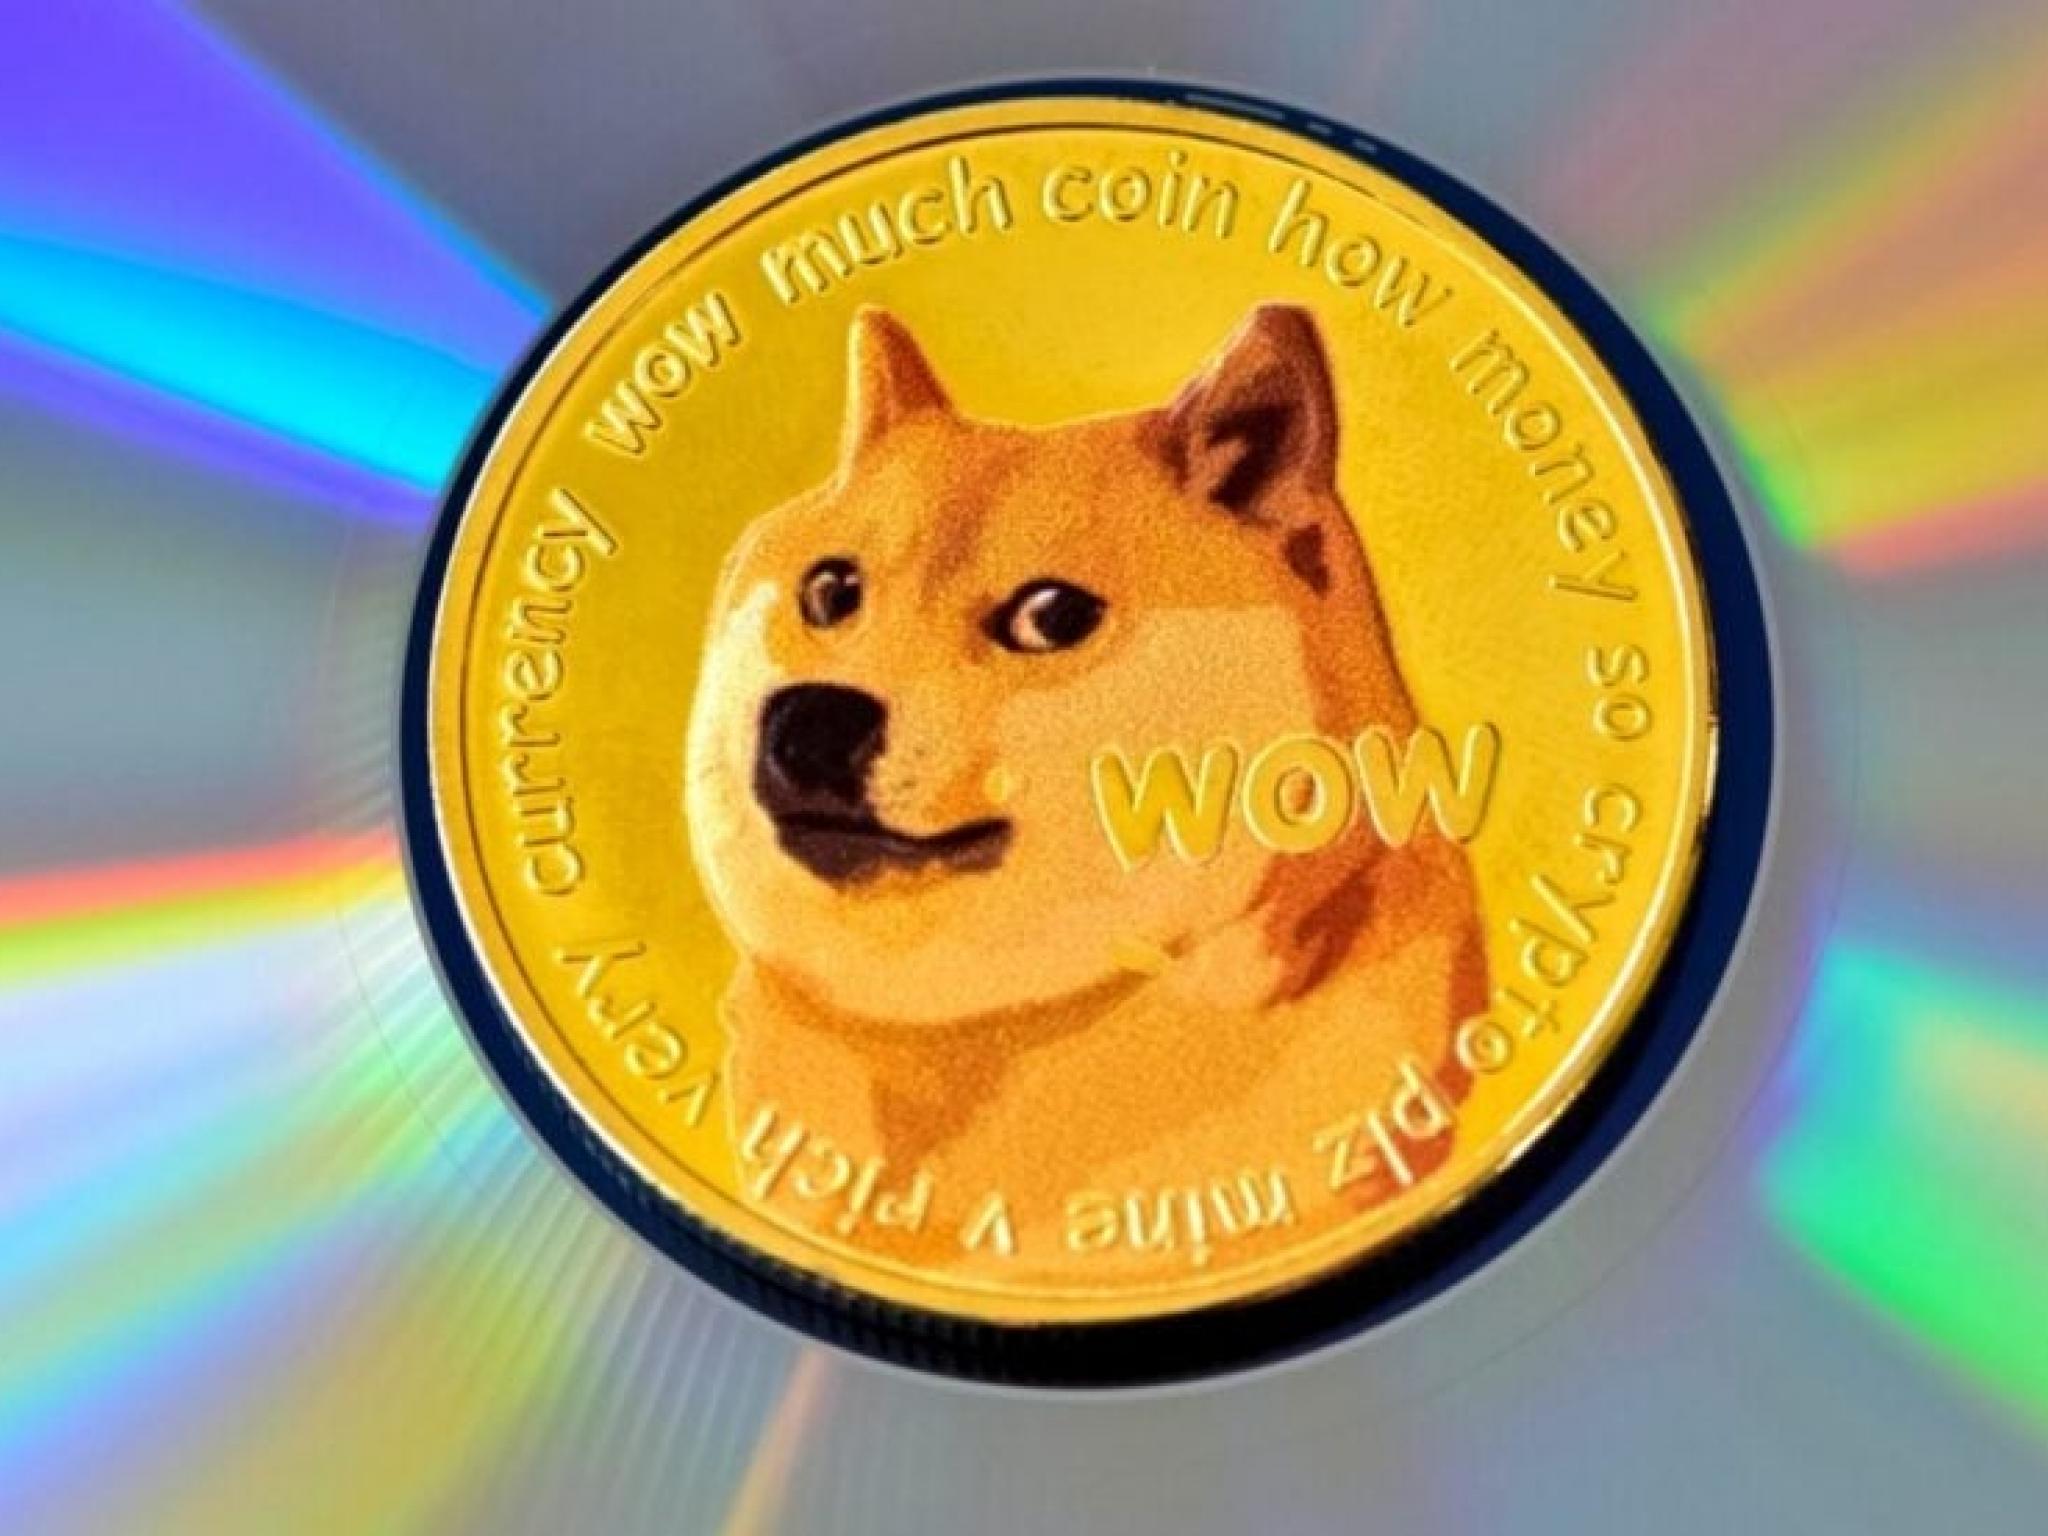  dogecoin-is-something-to-keep-an-eye-on-for-the-first-time-in-months-says-trader 